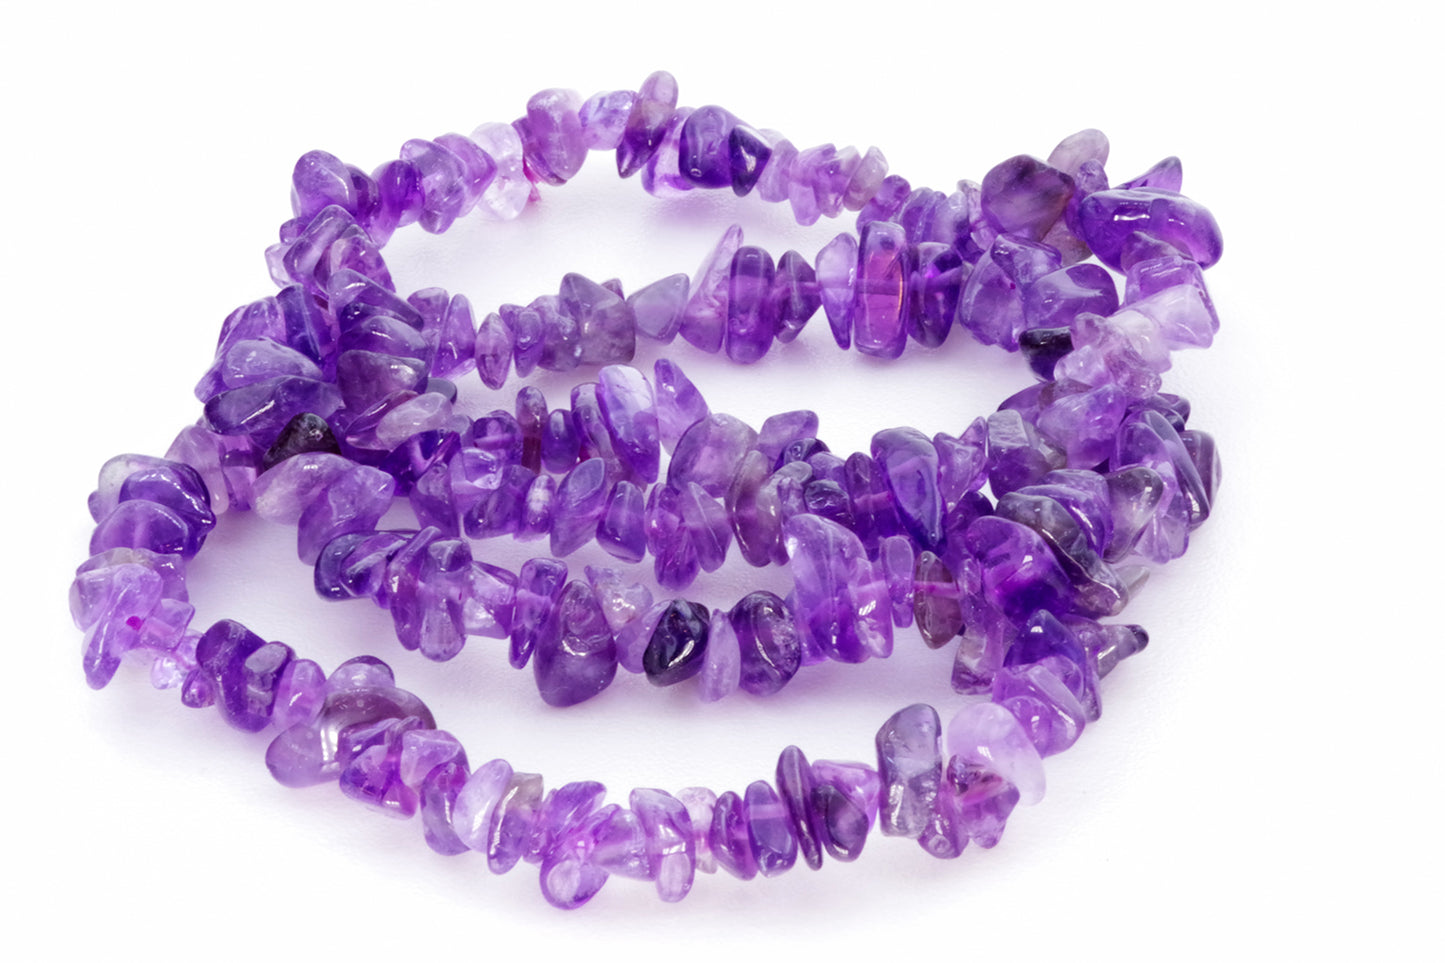 Amethyst-Armband – Chips